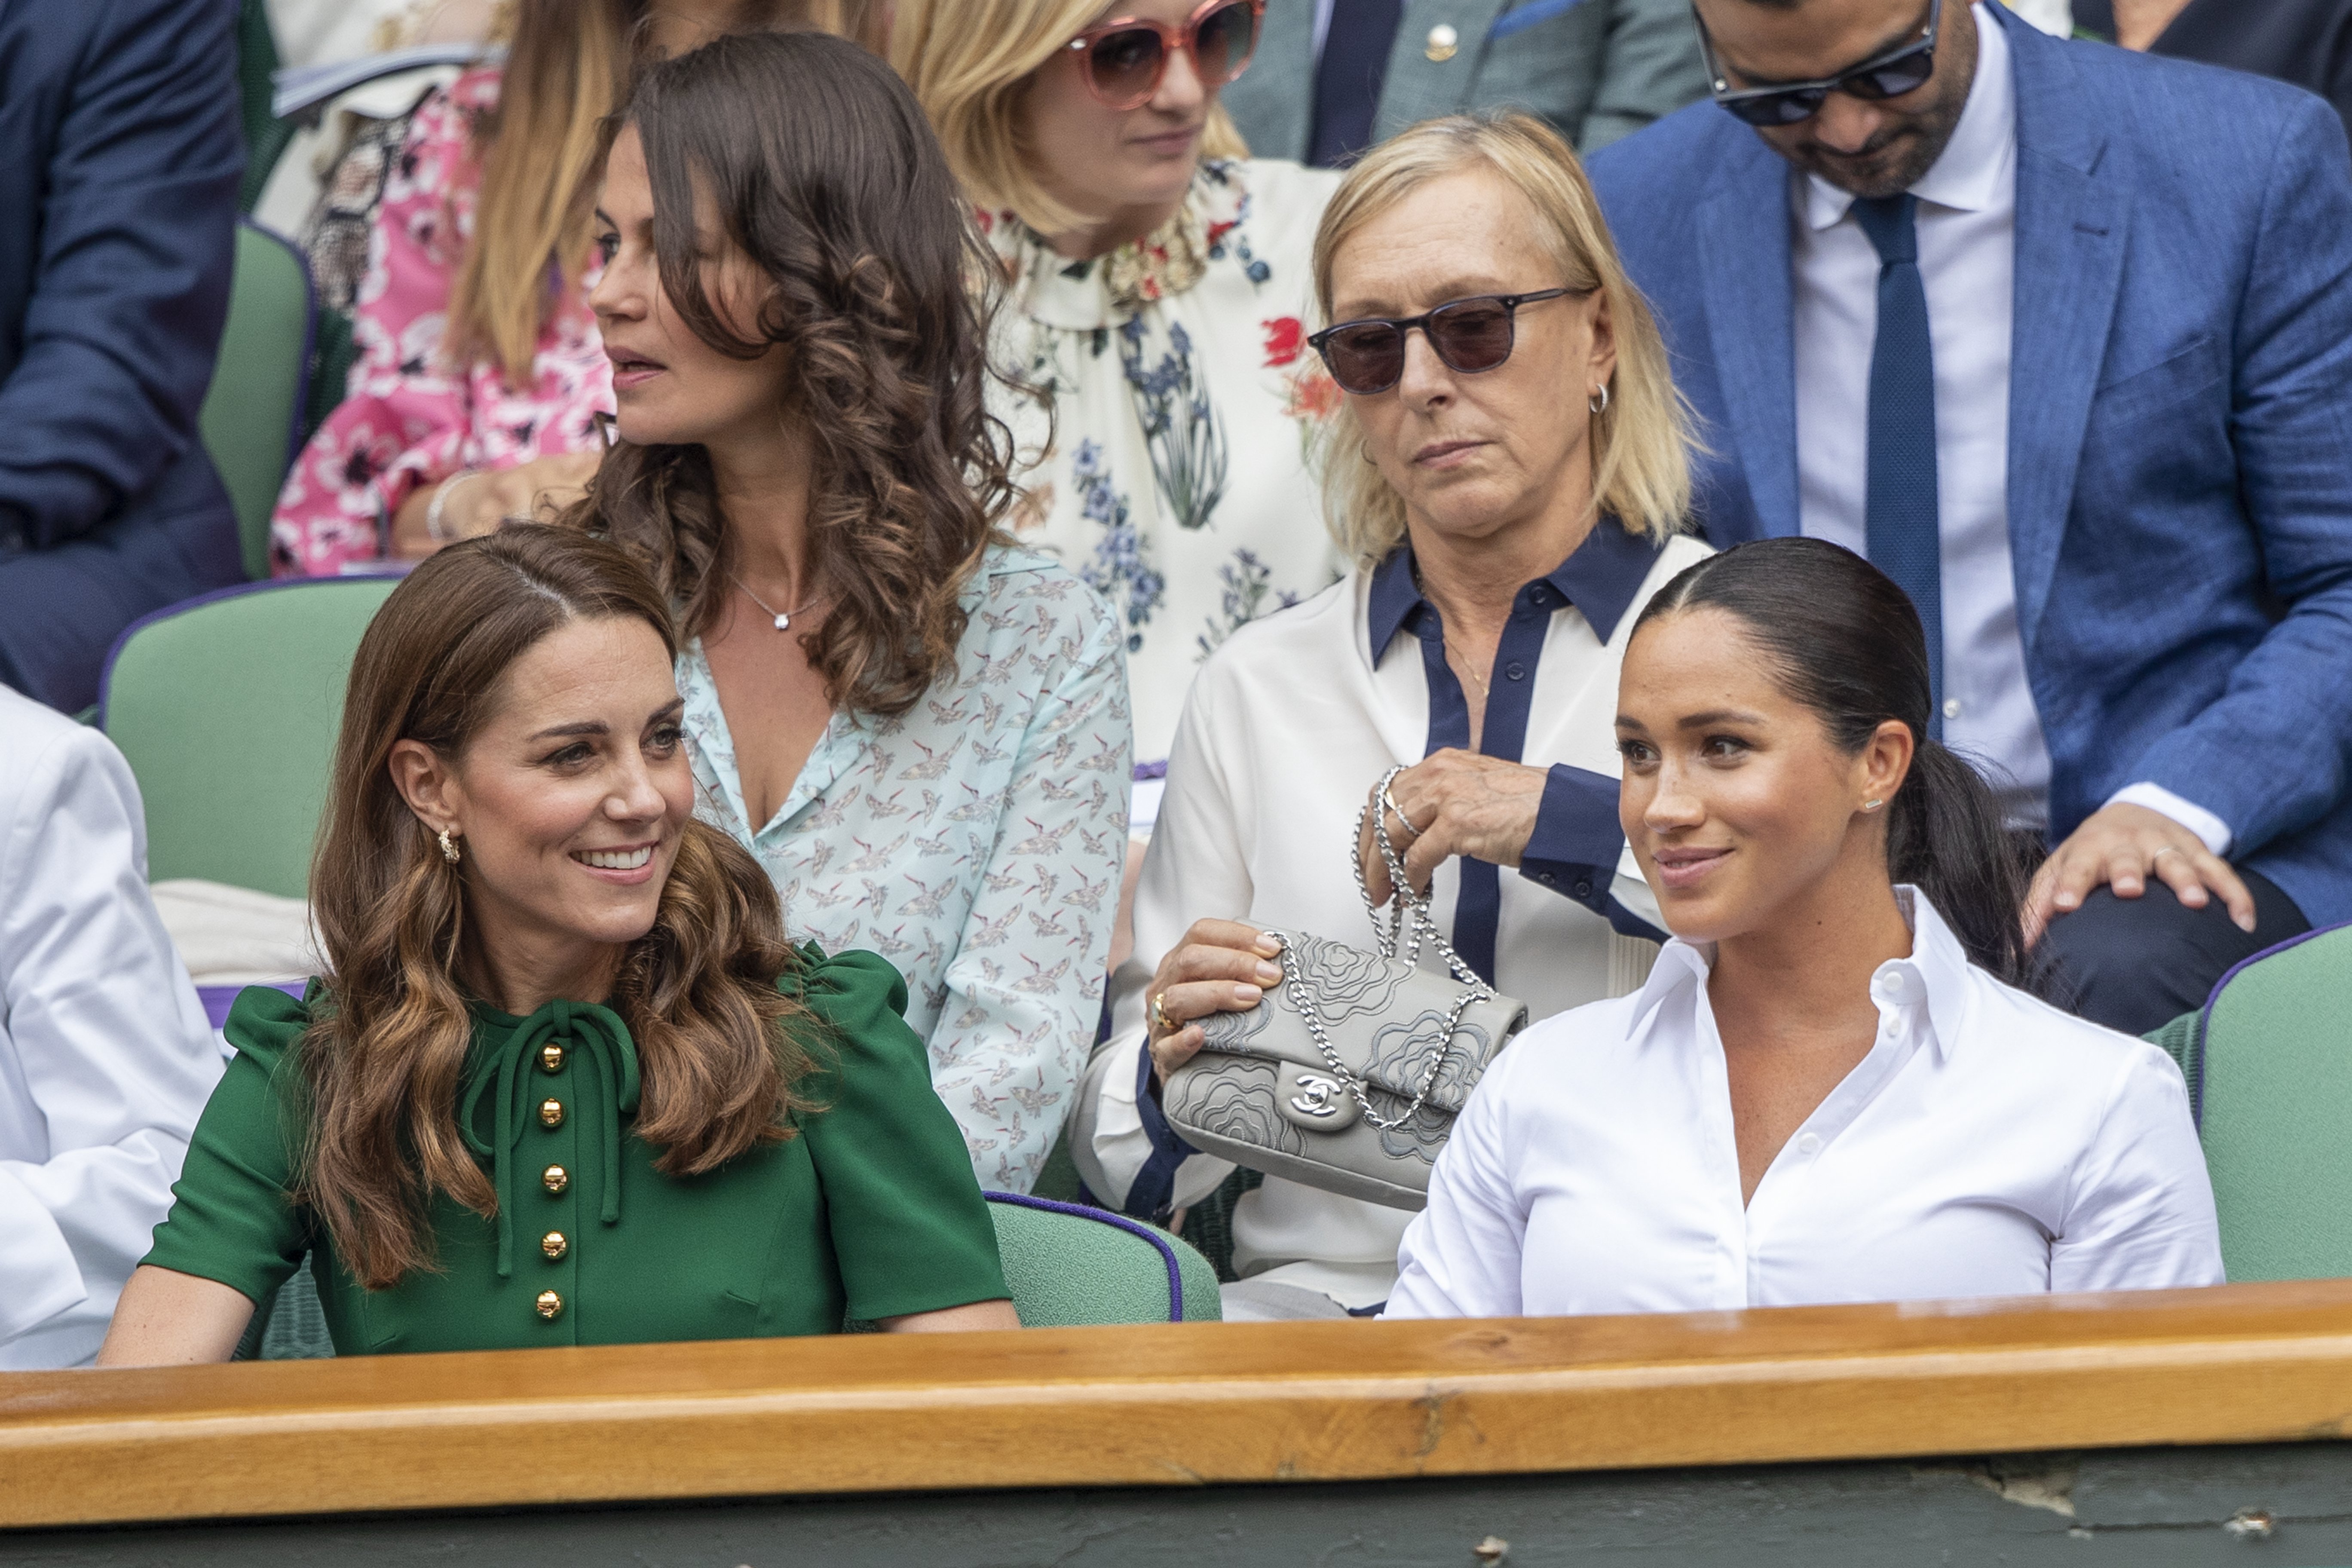 Kate Middleton and and Meghan Markle seated in the Royal Box on Centre Court during the Wimbledon Lawn Tennis Championships at the All England Lawn Tennis and Croquet Club at Wimbledon on July 13, 2019 in London, England. / Source: Getty Images